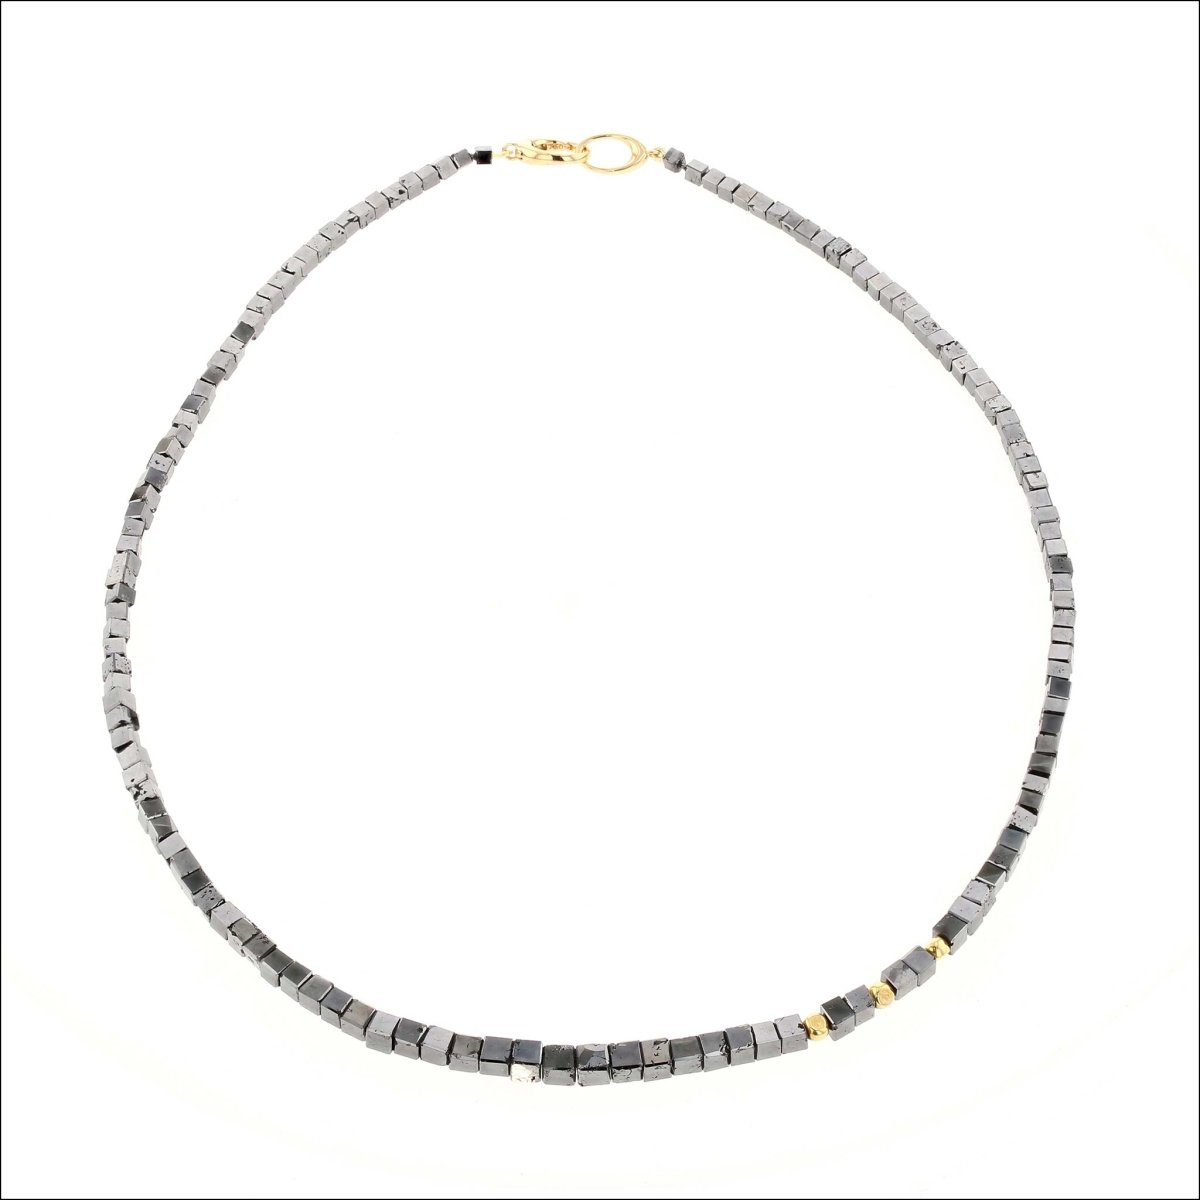 Black Diamond Cube Shaped Bead Strand Necklace with Gold Beads 17.5" 18KY - JewelsmithNecklaces